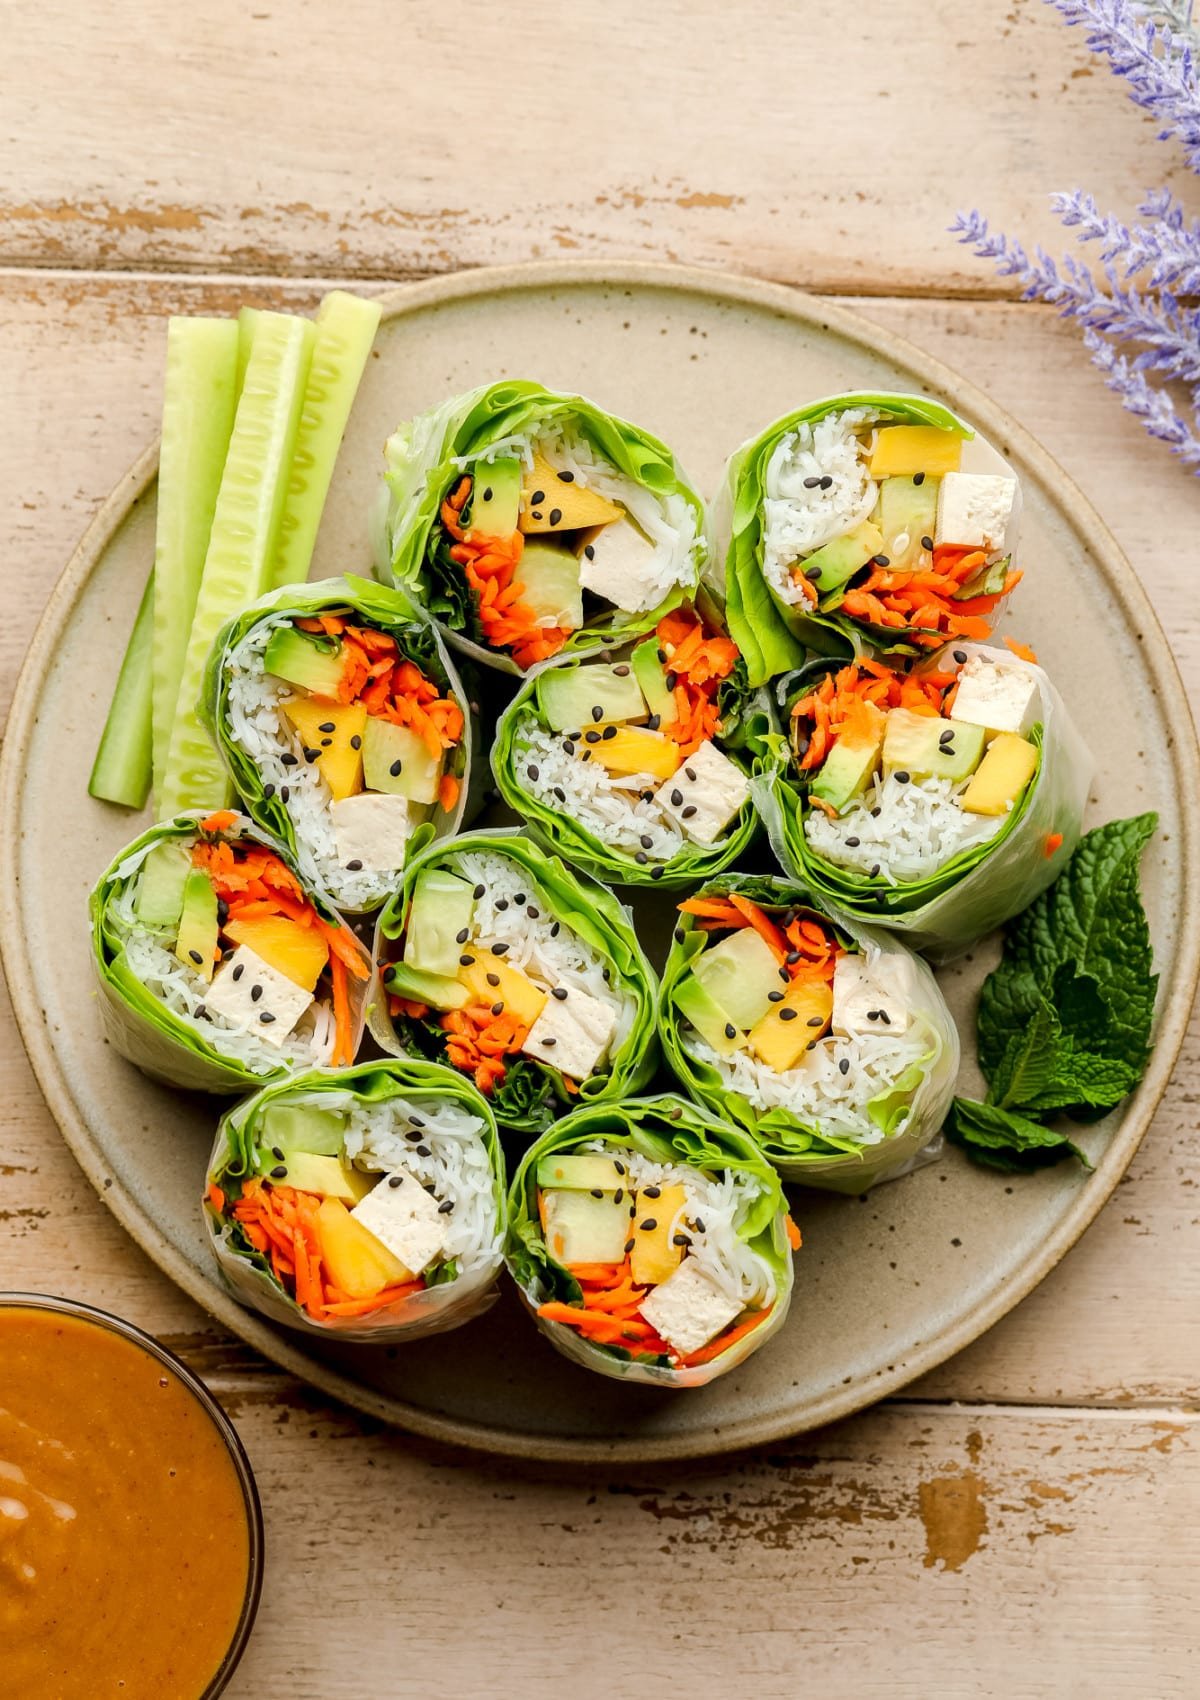 plate of salad rolls on wood background, they're cut in half showing inside